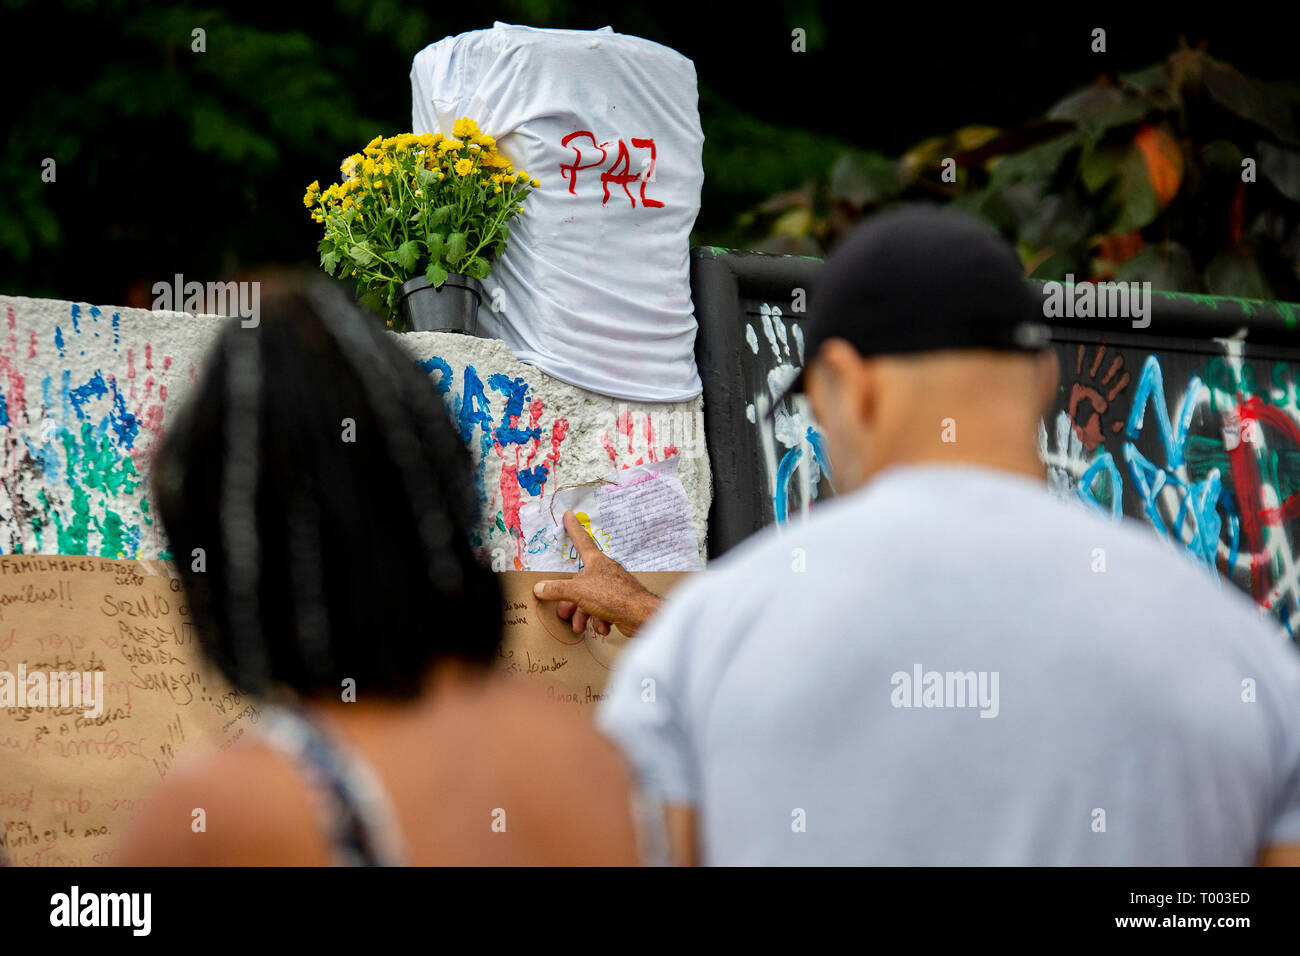 Sao Paulo, Brazil. 16th March 2019. SP - Sao Paulo - 03/16/2019 - Movement State School Raul Brasil - Movement in front of Raul Brasil State School in the city of Suzano region of Sao Paulo, 3 days after the massacre that left 10 dead and several injured. People continue to pay homage to the victims, with prayers, flowers or the handprints of Maoes printed with colored paint on the school wall, which has become a symbol of solidarity throughout the days. Photo: Suamy Beydoun / AGIF Stock Photo